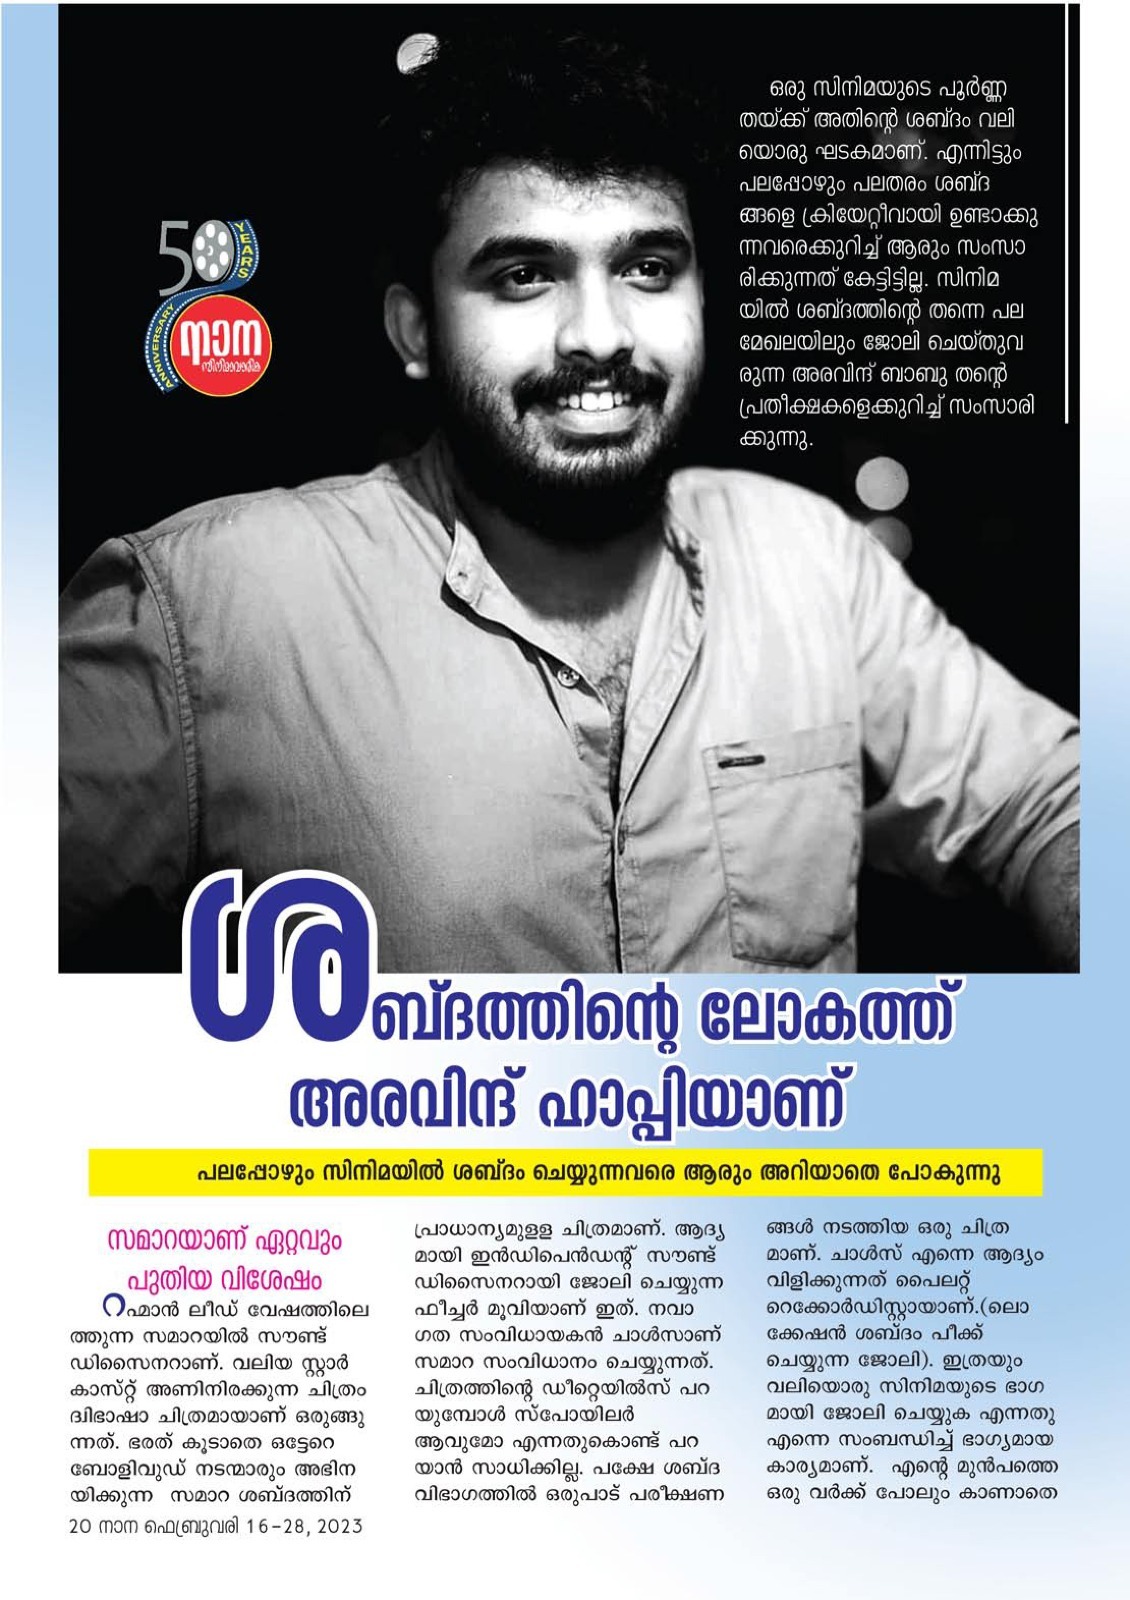 A feature came in Media on Our NEOS Sound Designer Aravind Babu